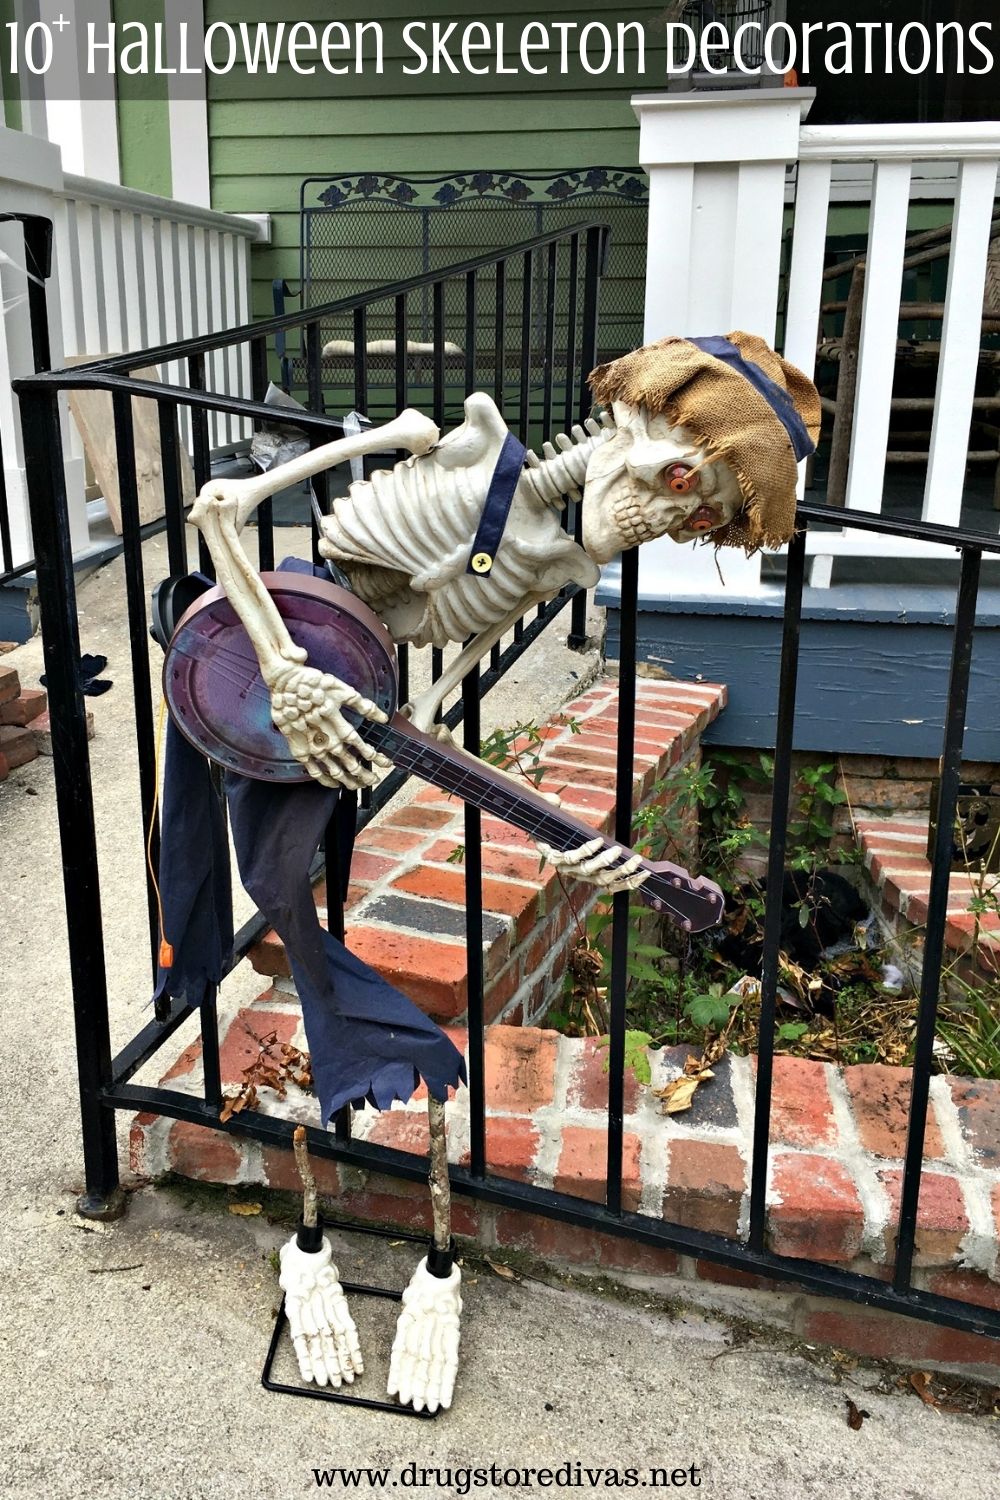 A skeleton Halloween decoration holding a bango with the words "10_ Skeleton Halloween Decorations" digitally written above it.